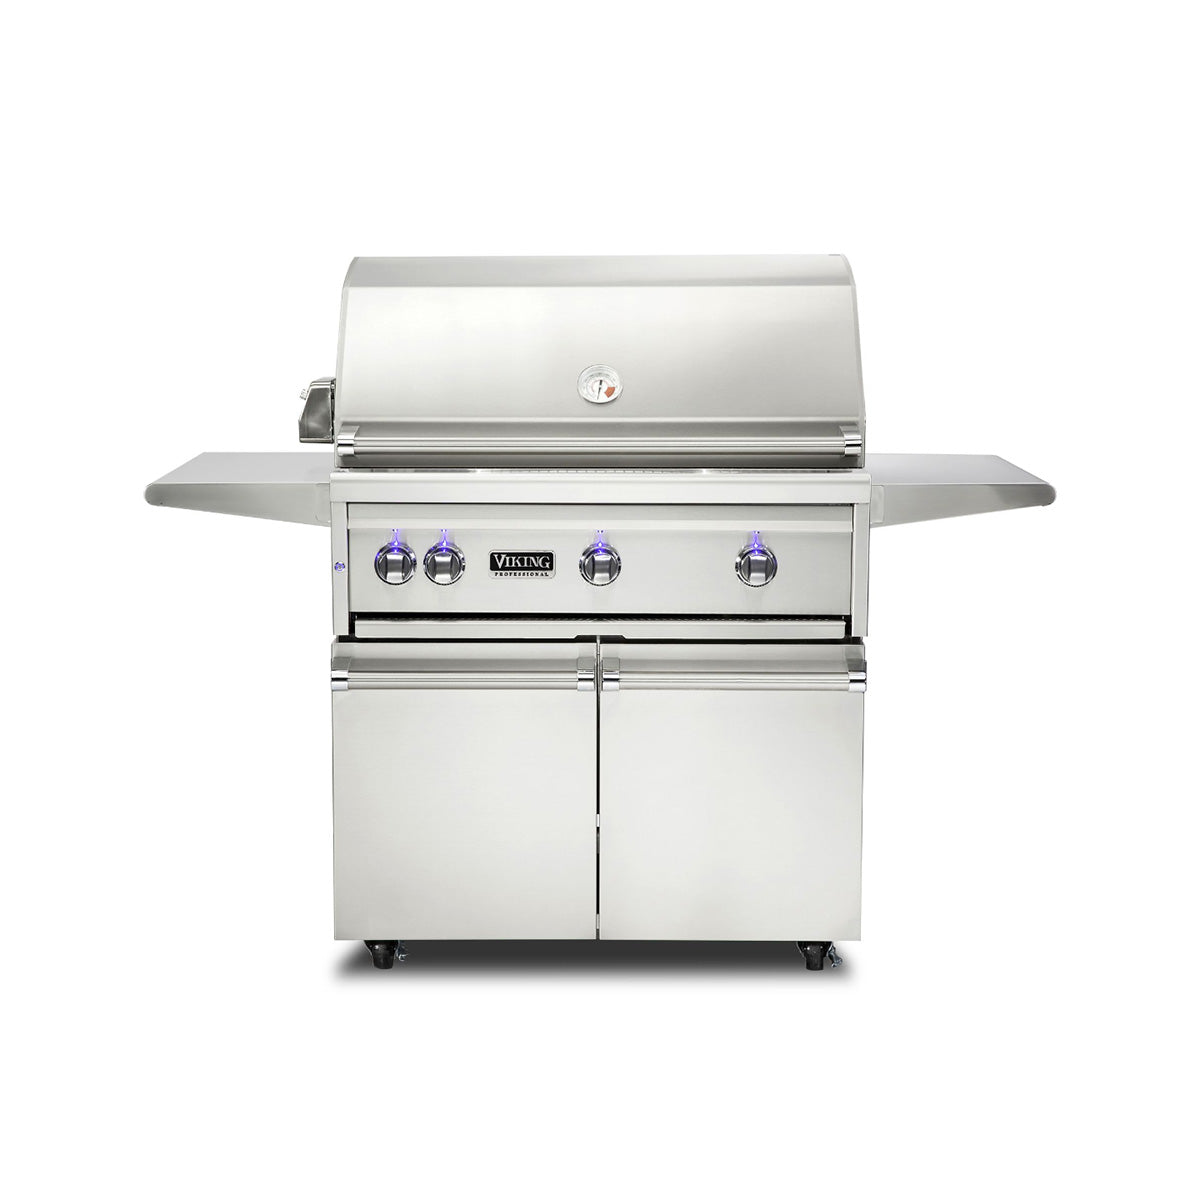 36"W. Freestanding Grill with ProSear Burner and Rotisserie